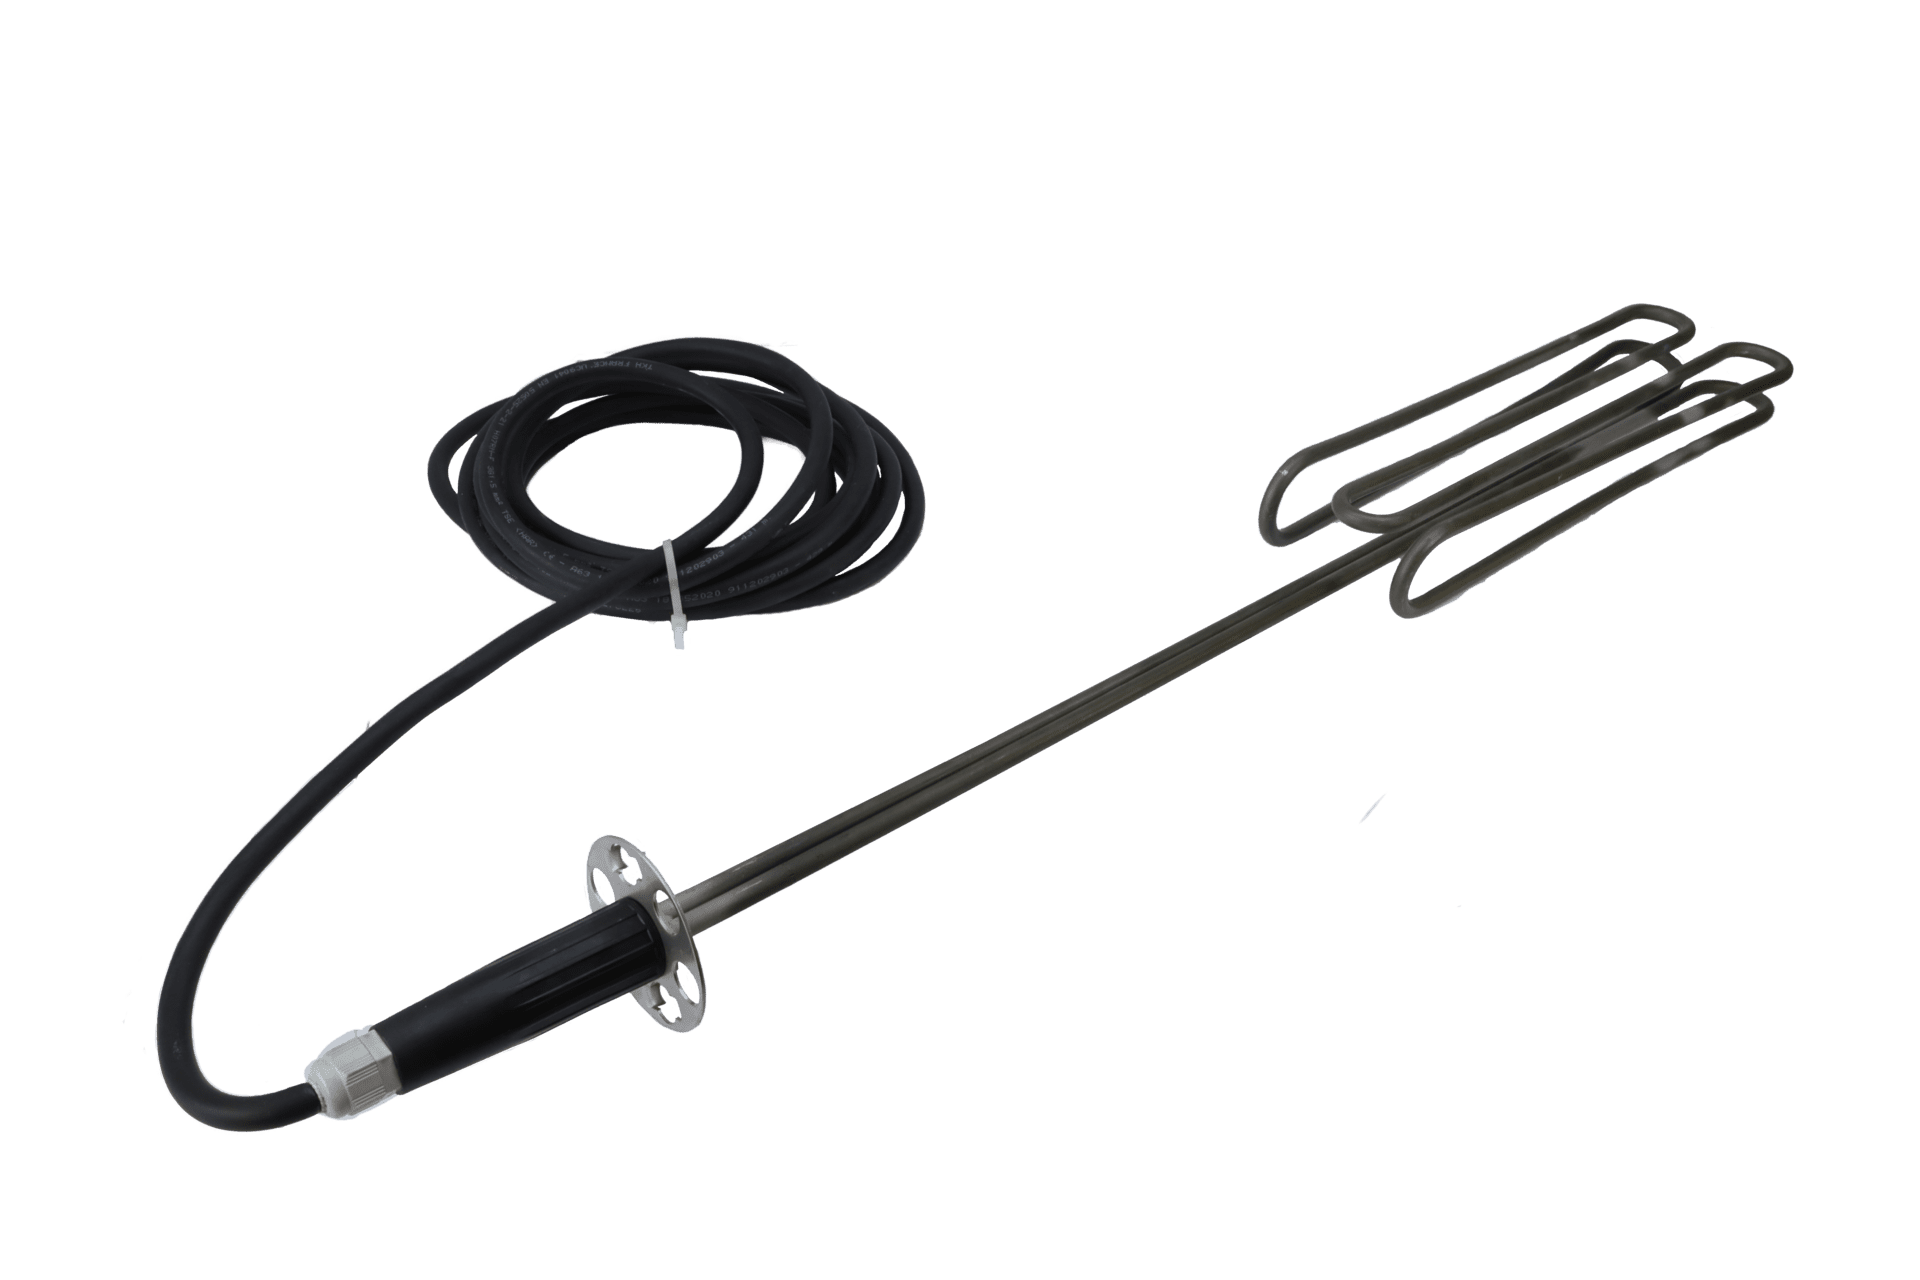 removable-immersion heater-acim-jouanin-922717